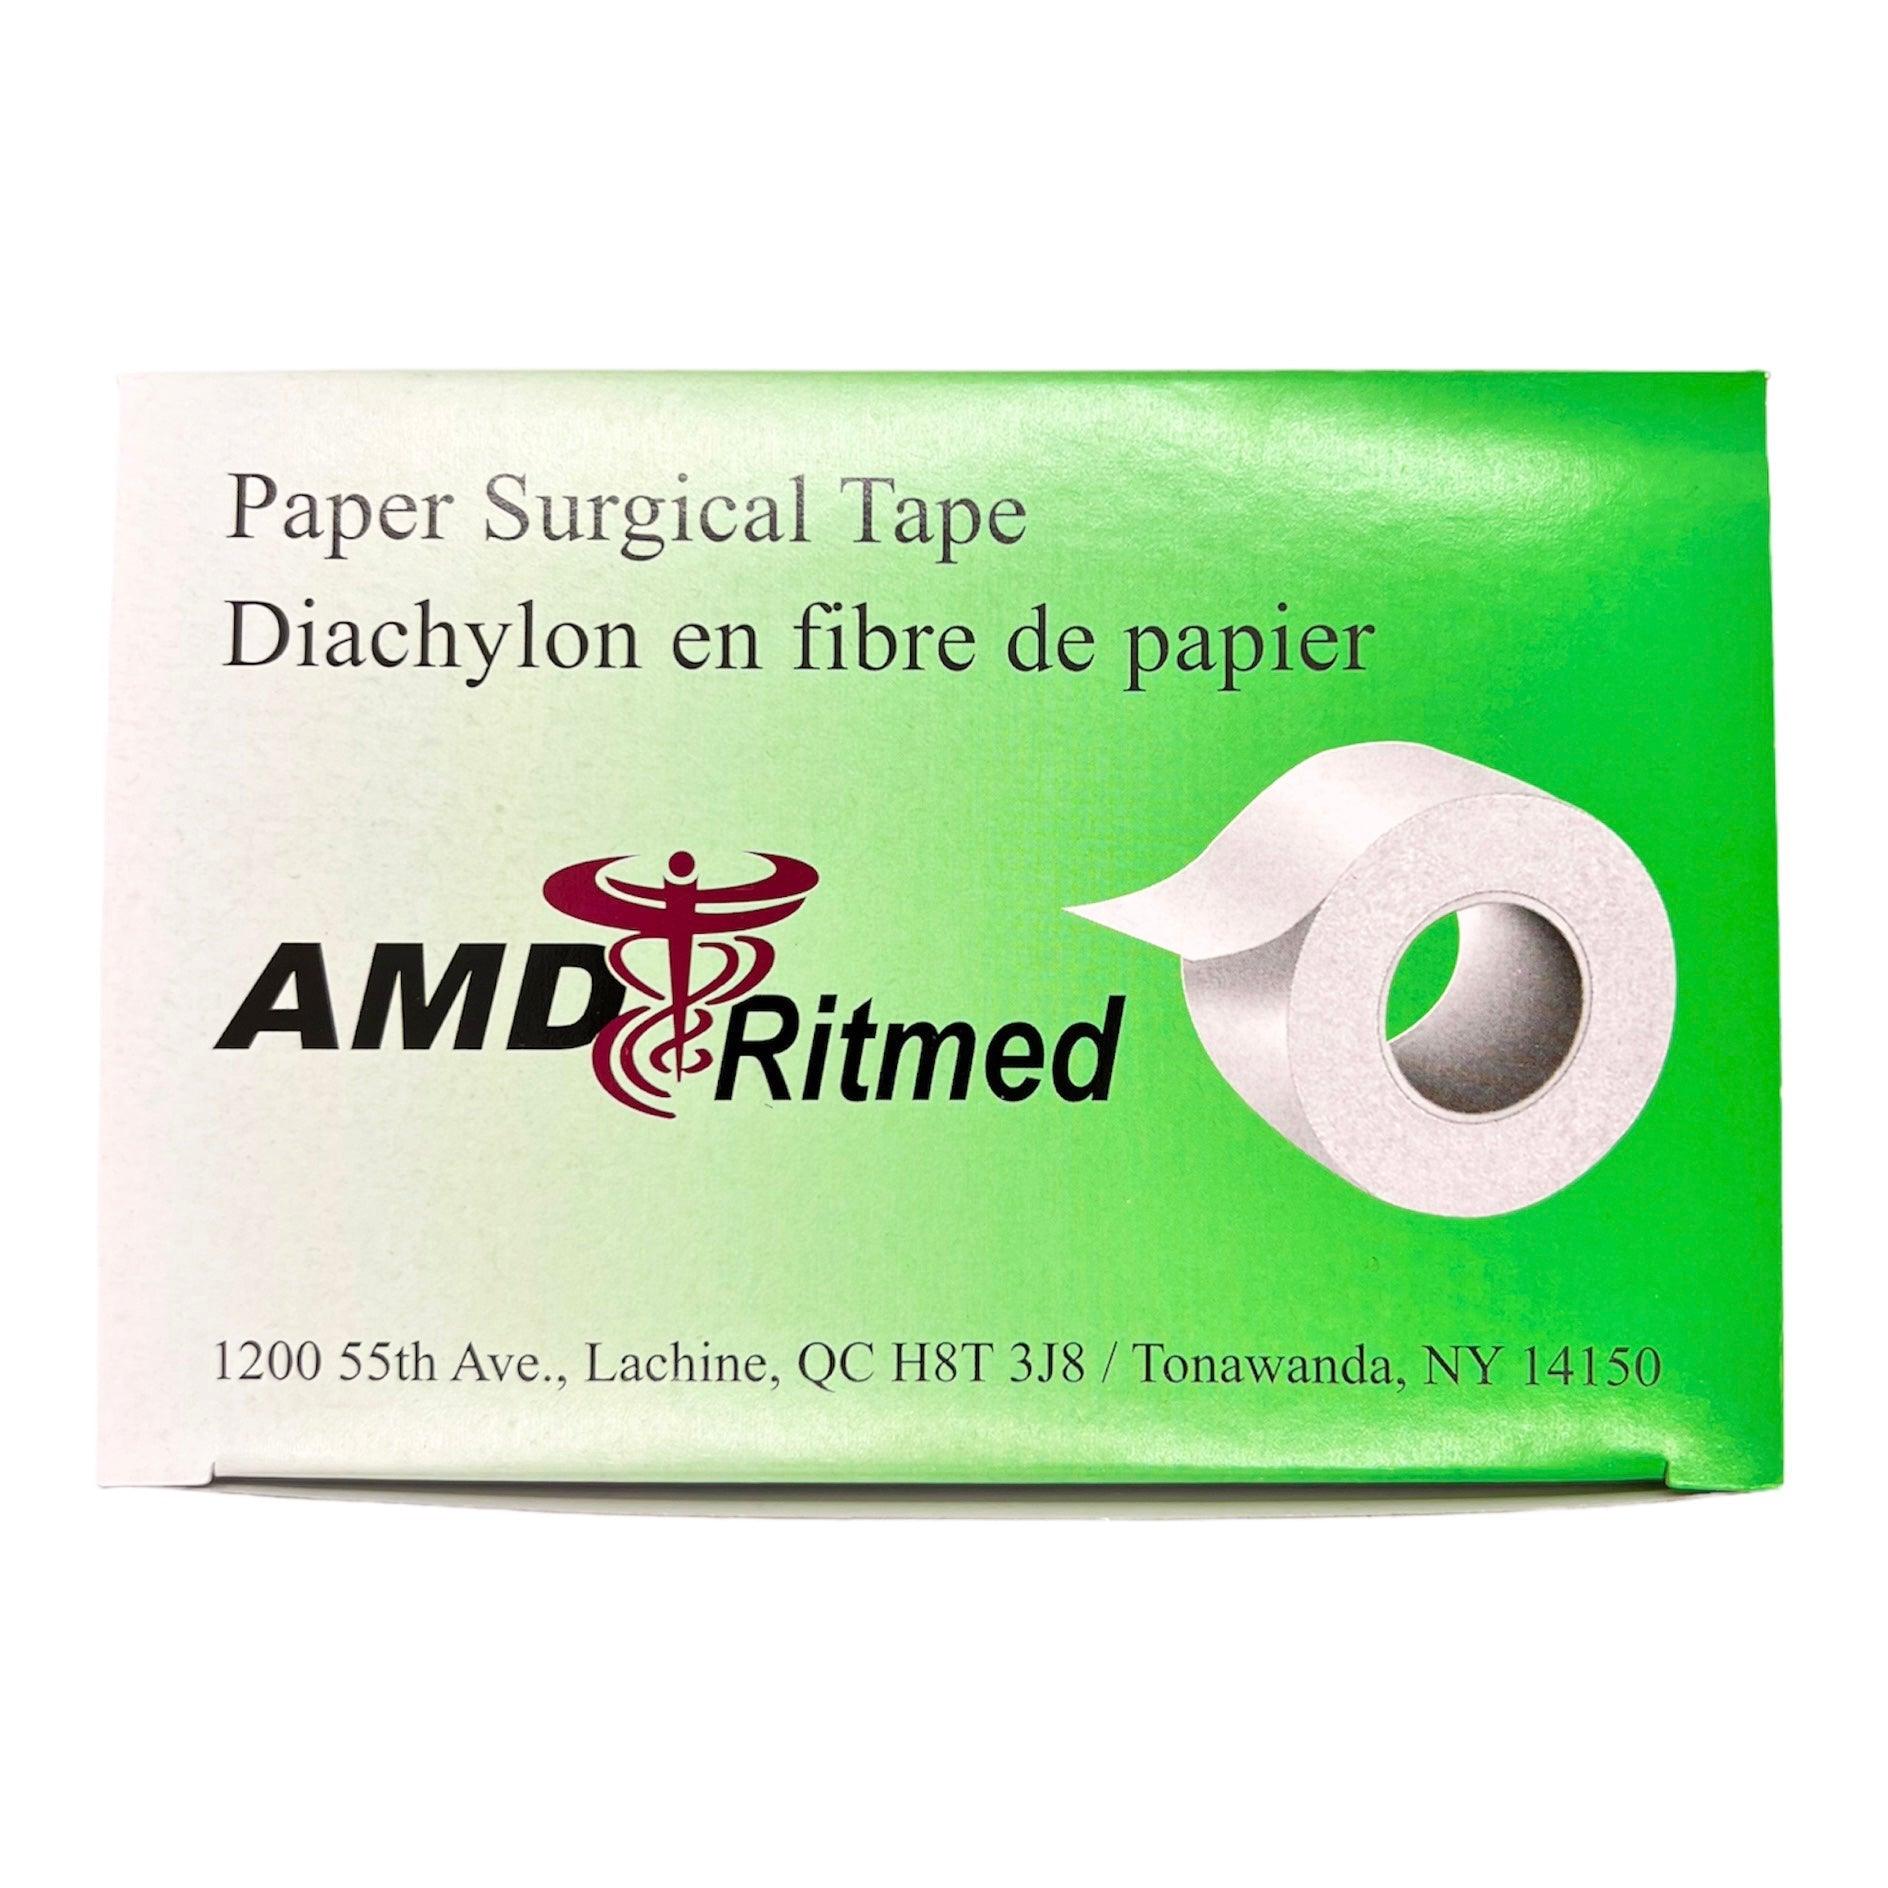 AMD Ritmed - Micropore Paper Surgical Tape (2" x 10 yds)